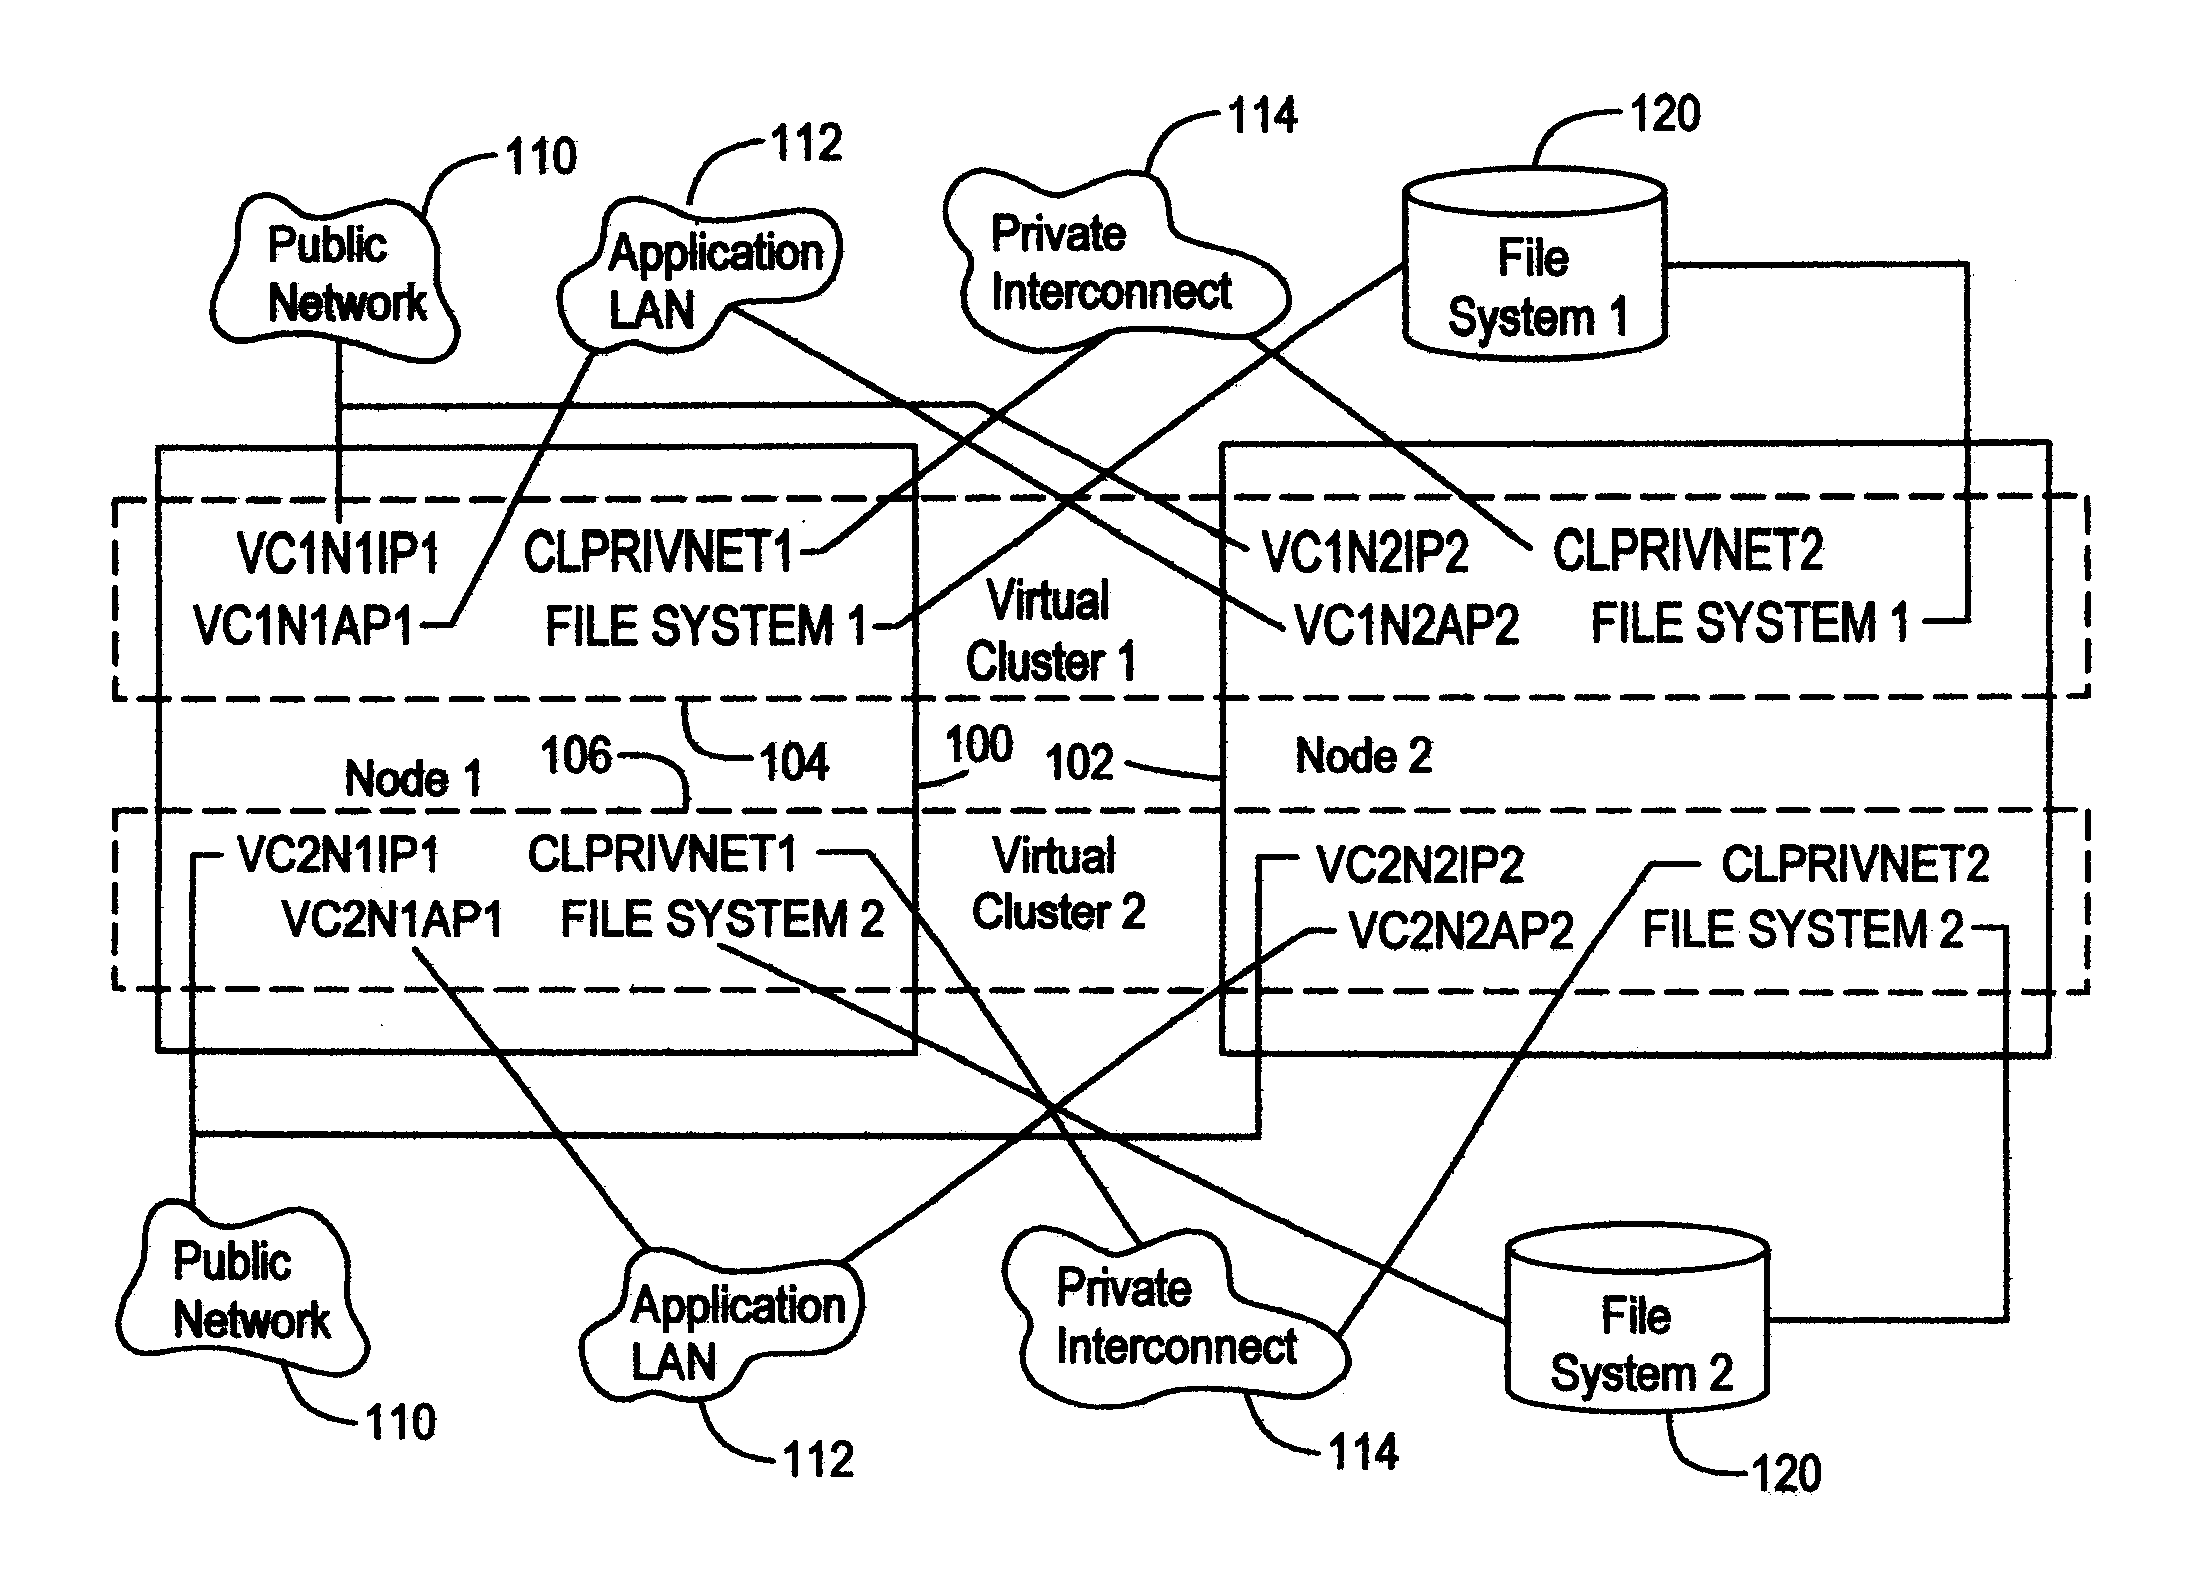 Virtual cluster based upon operating system virtualization